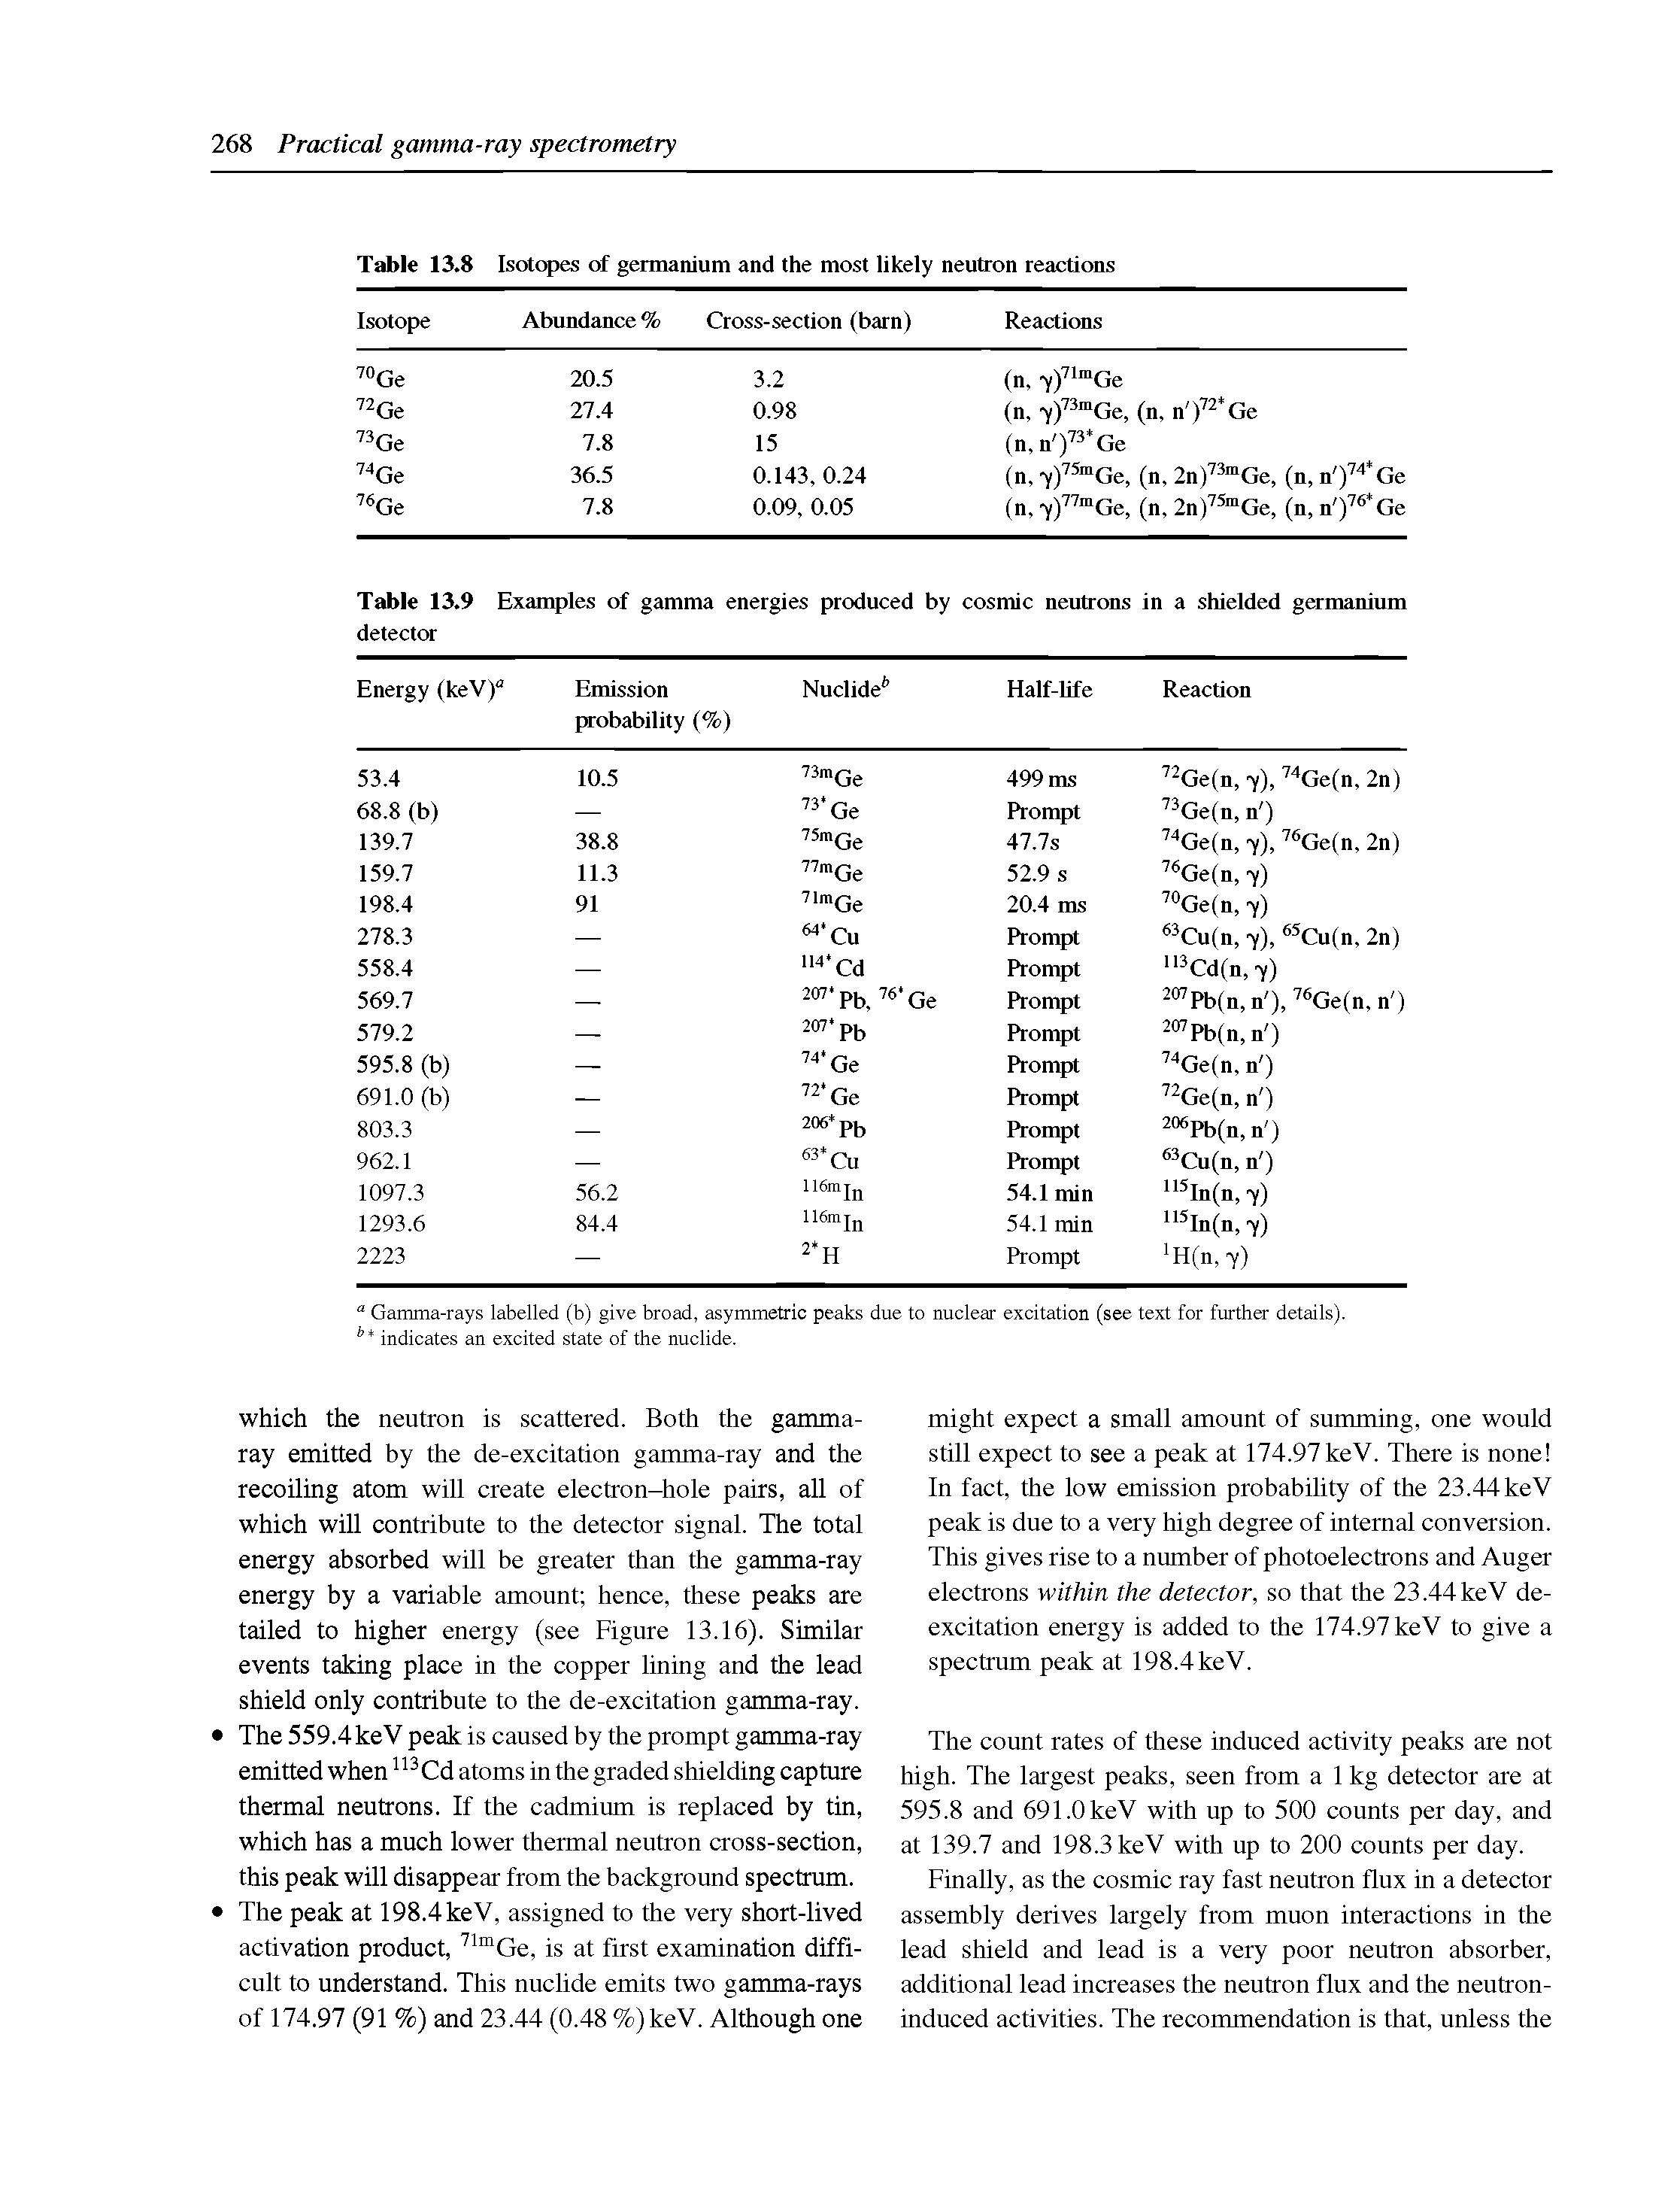 Table 13.9 Examples of gamma energies produced by cosmic neutrons in a shielded germanium...